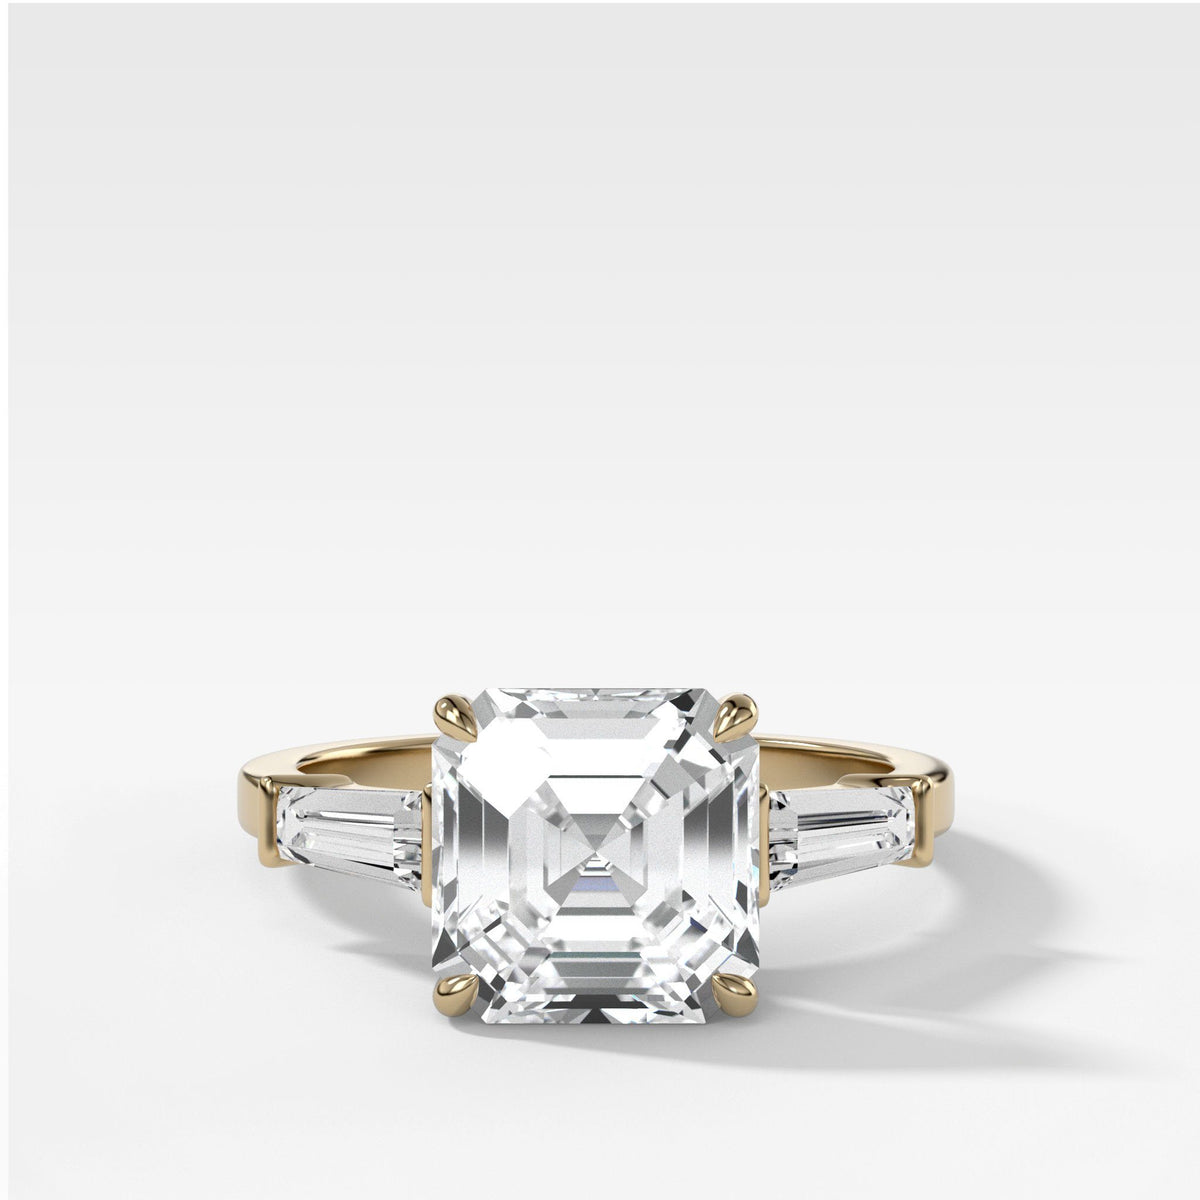 Translunar Tapered Baguette Engagement Ring With Asscher Cut by Good Stone in Yellow Gold